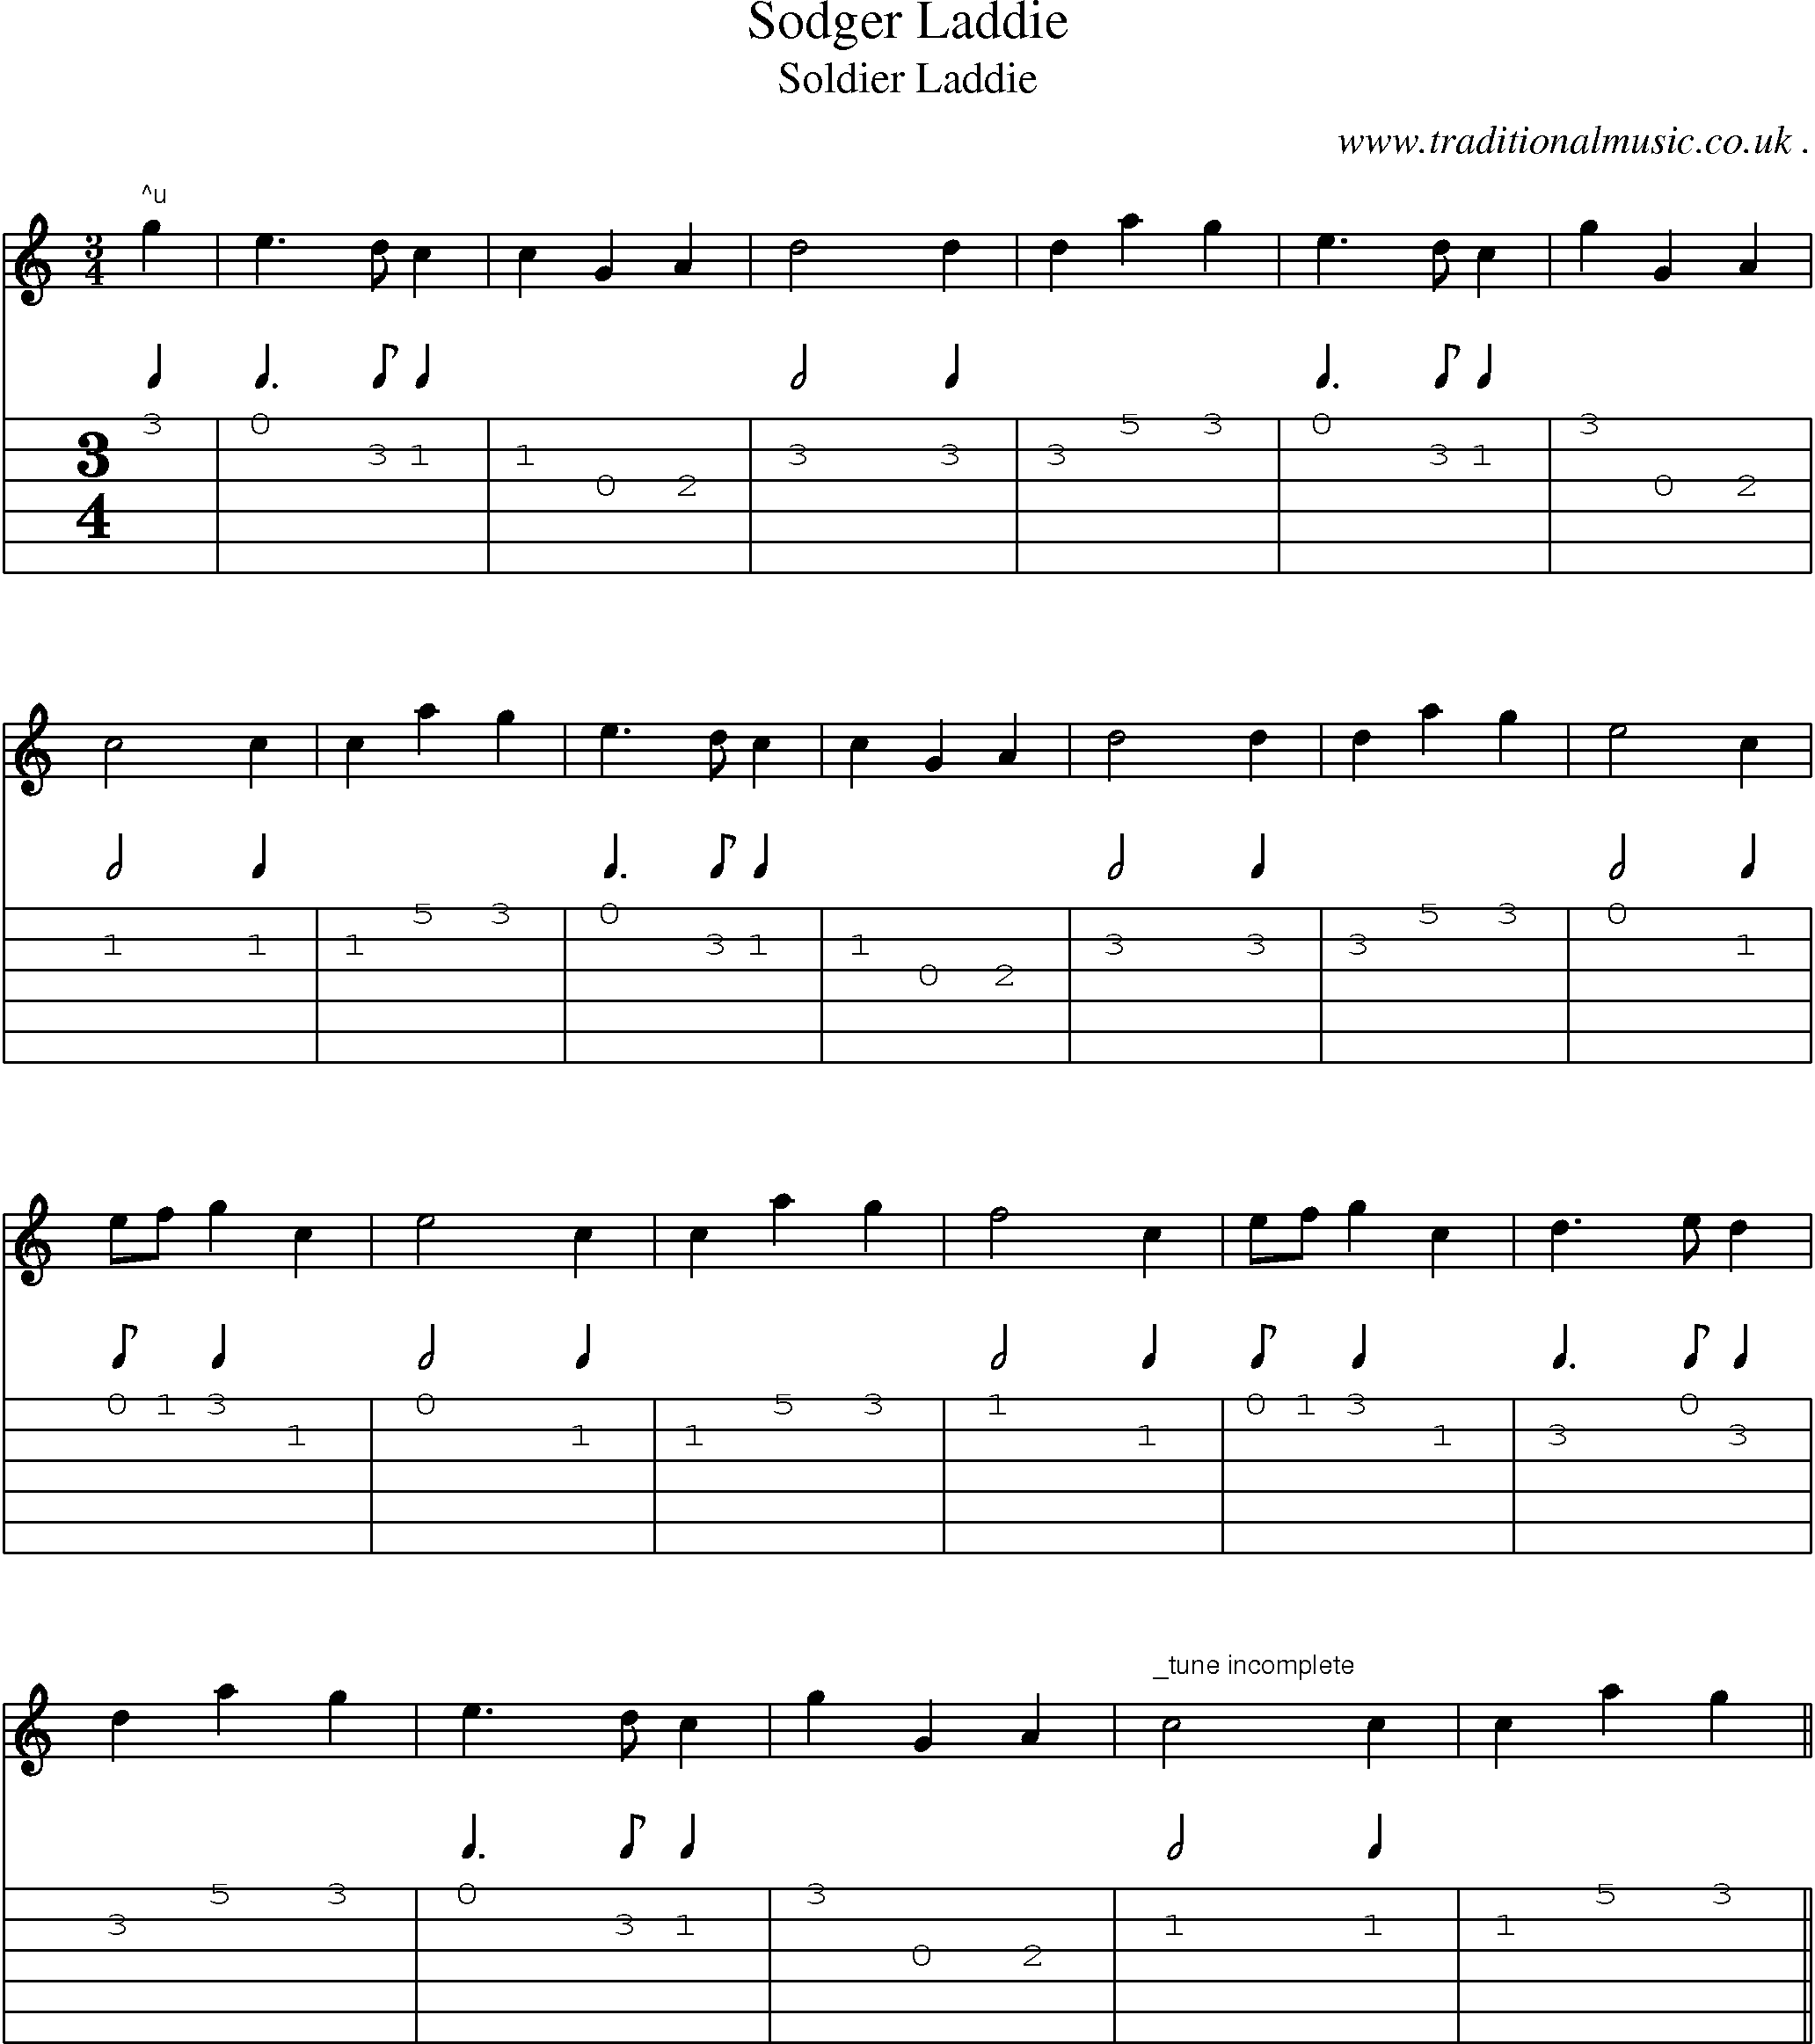 Sheet-Music and Guitar Tabs for Sodger Laddie